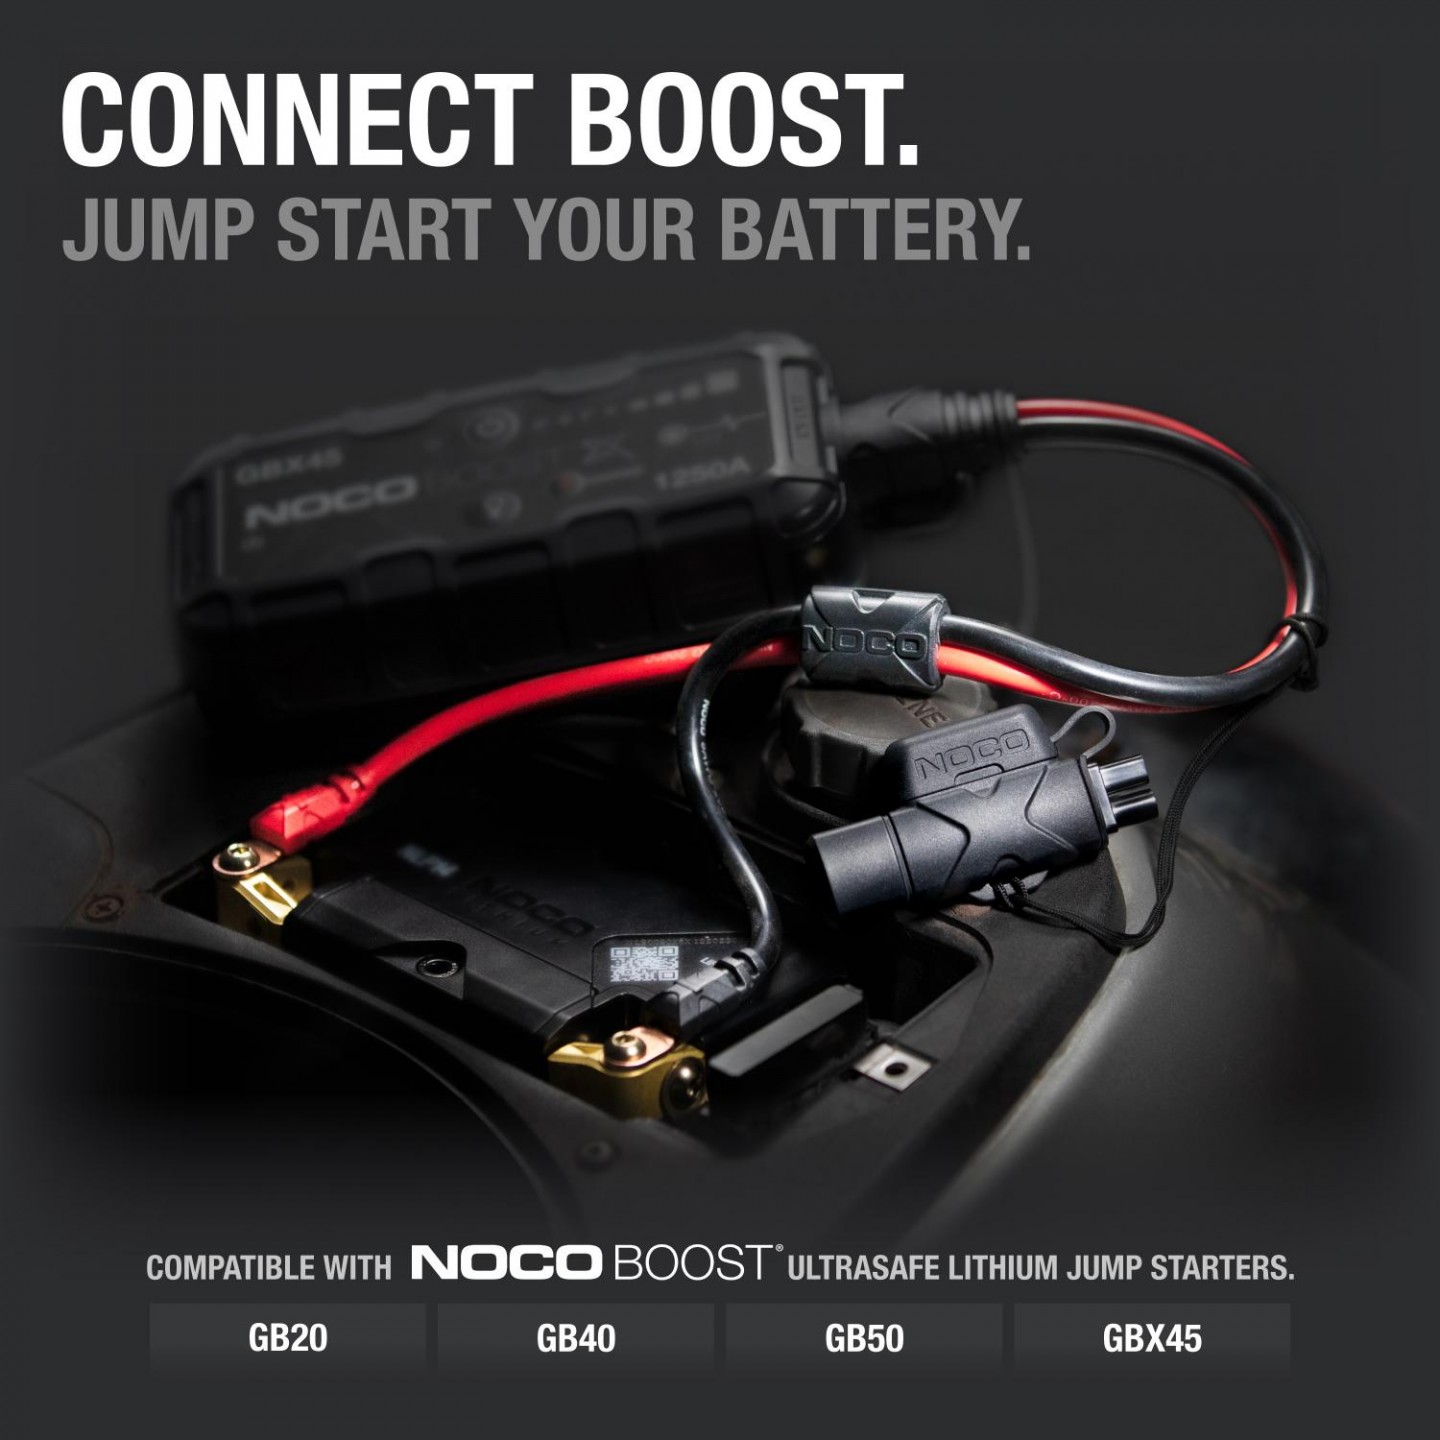 https://no.co/media/catalog/product/cache/1/image/1440x/040ec09b1e35df139433887a97daa66f/G/B/GBC007_Connected_To_NOCO_GBX45_Boost_Jump_Starter_And_Eyelets_Hardwired_To_Vespa_Battery_Terminals_Compatible_With_GB20_GB40_GB50_and_GBX45_Boost_Jump_Starters.jpg